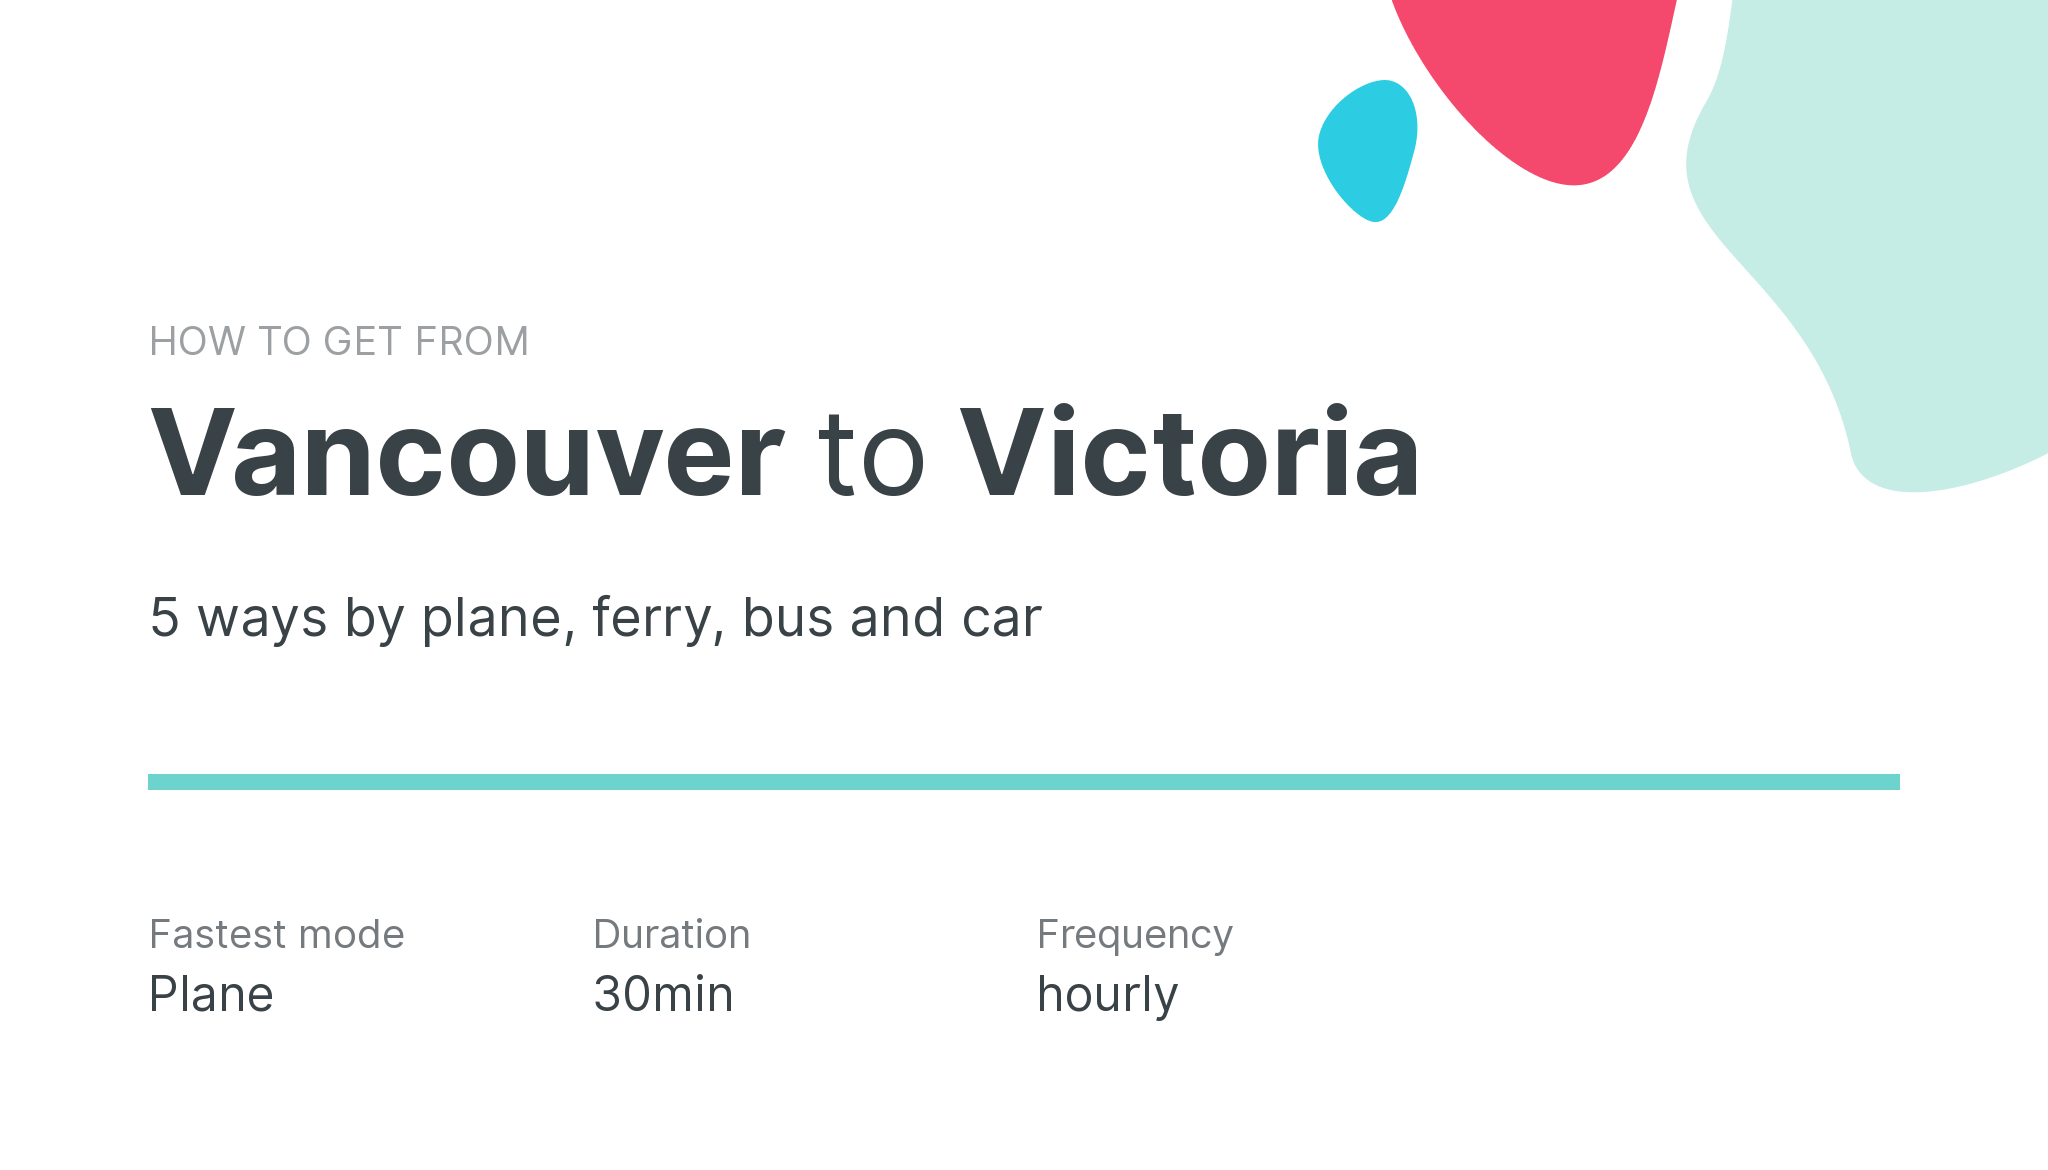 How do I get from Vancouver to Victoria